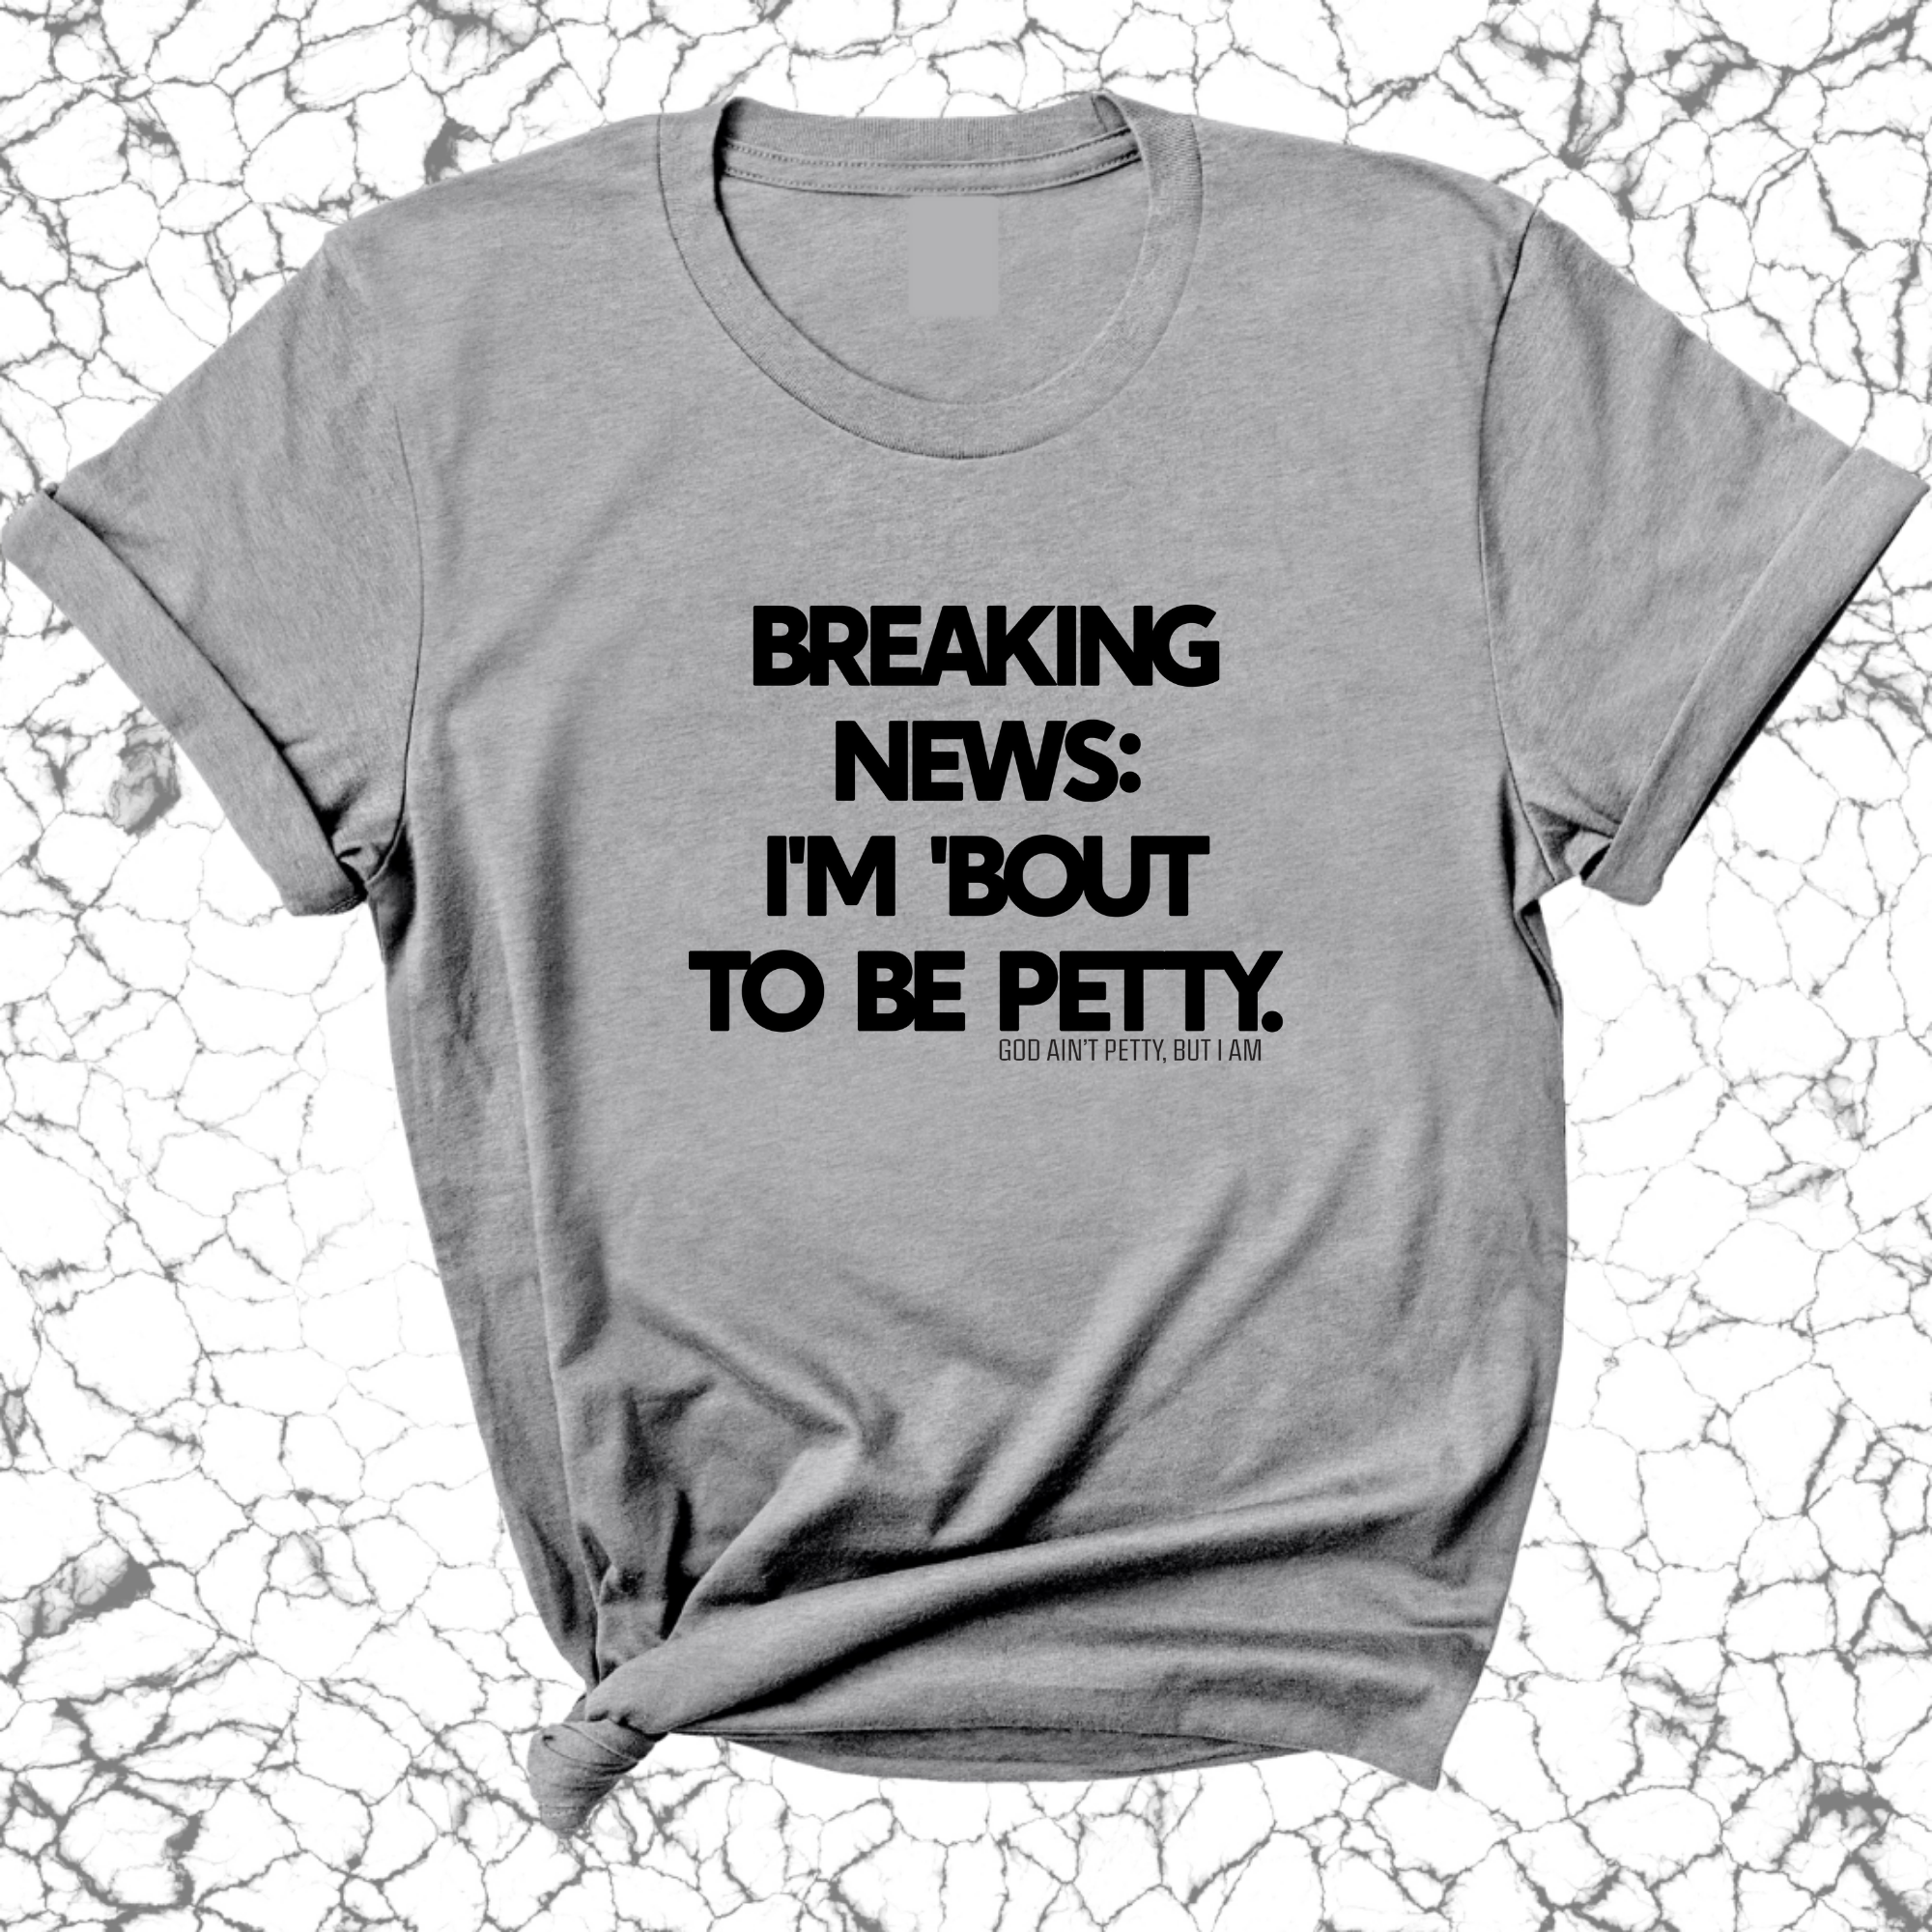 Breaking News: I'm 'bout to be Petty Unisex Tee-T-Shirt-The Original God Ain't Petty But I Am